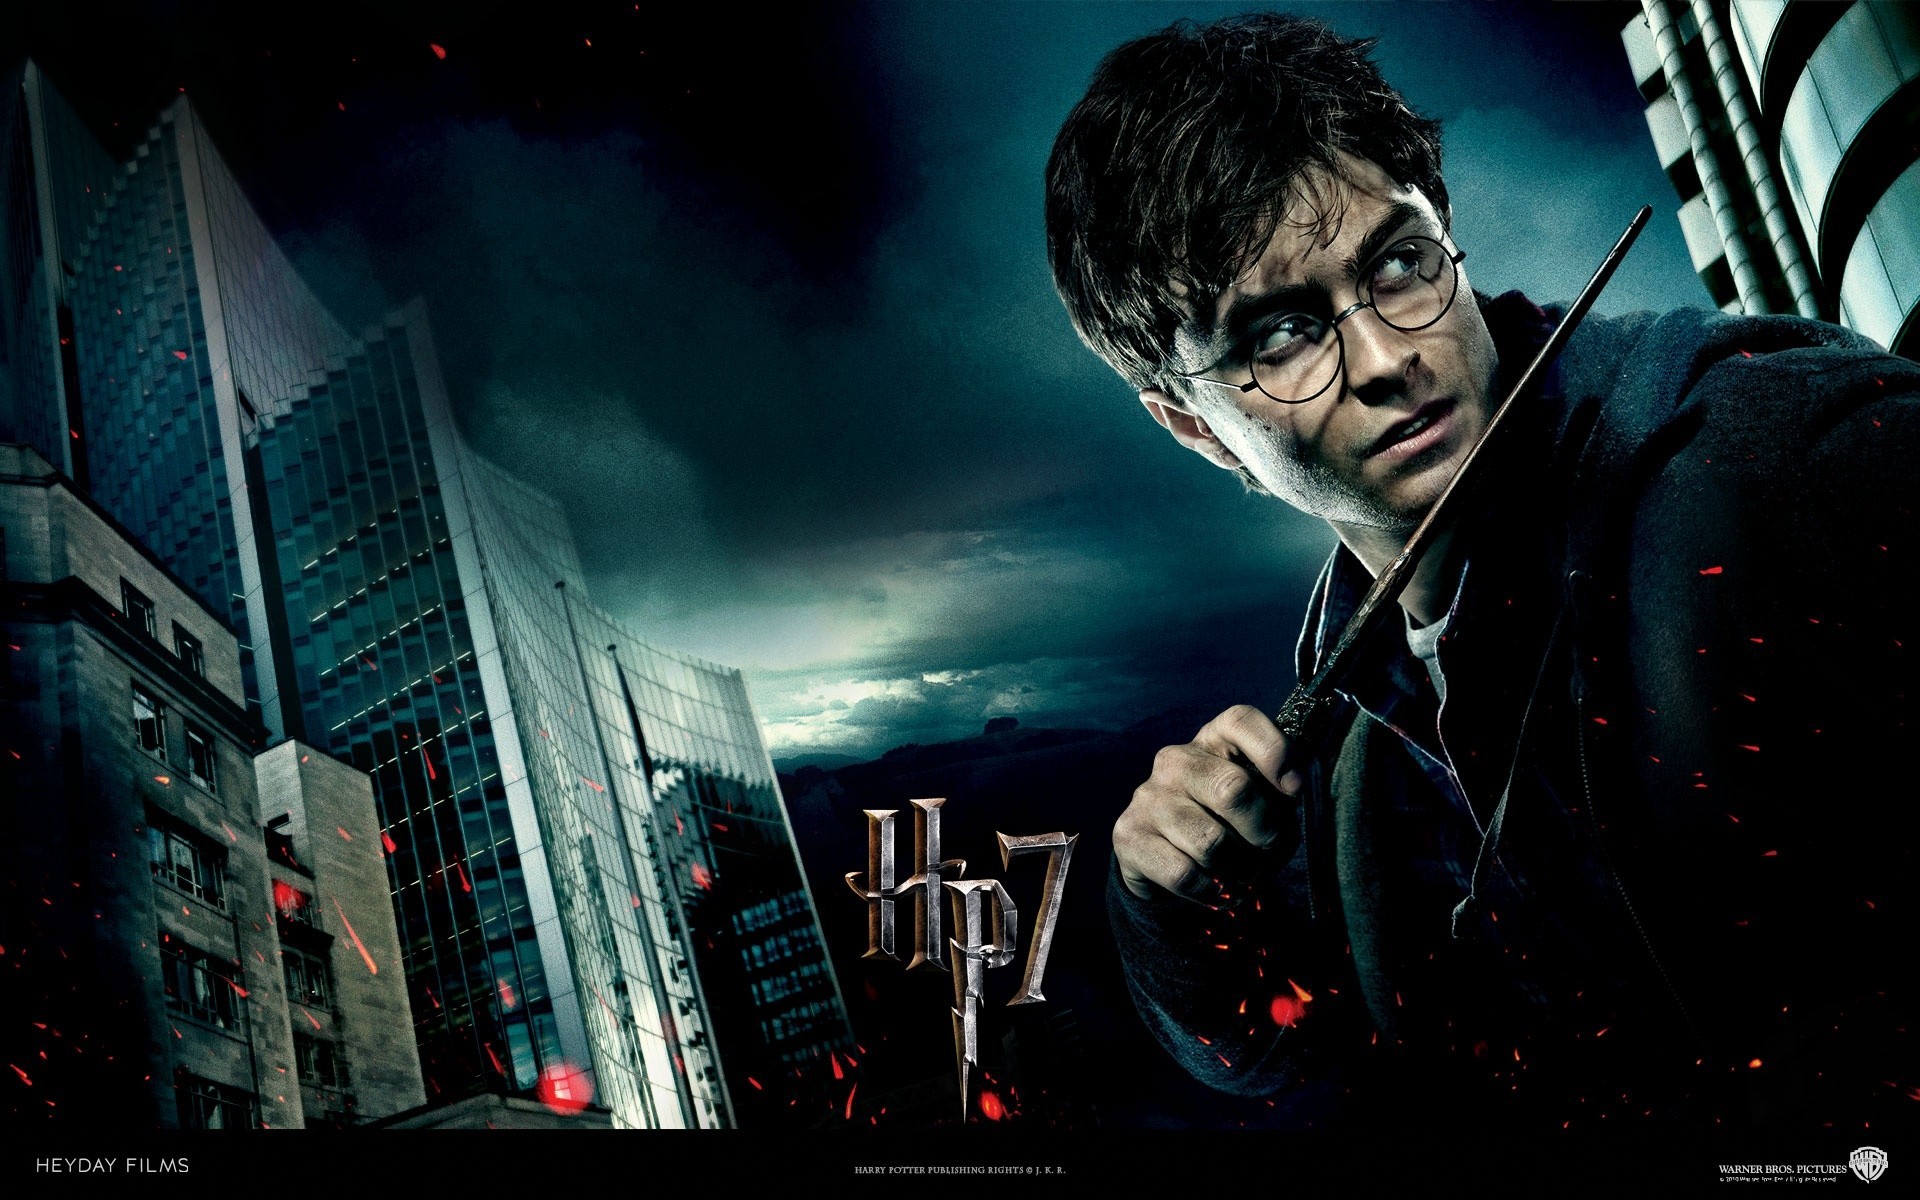 harry potter movies download hd